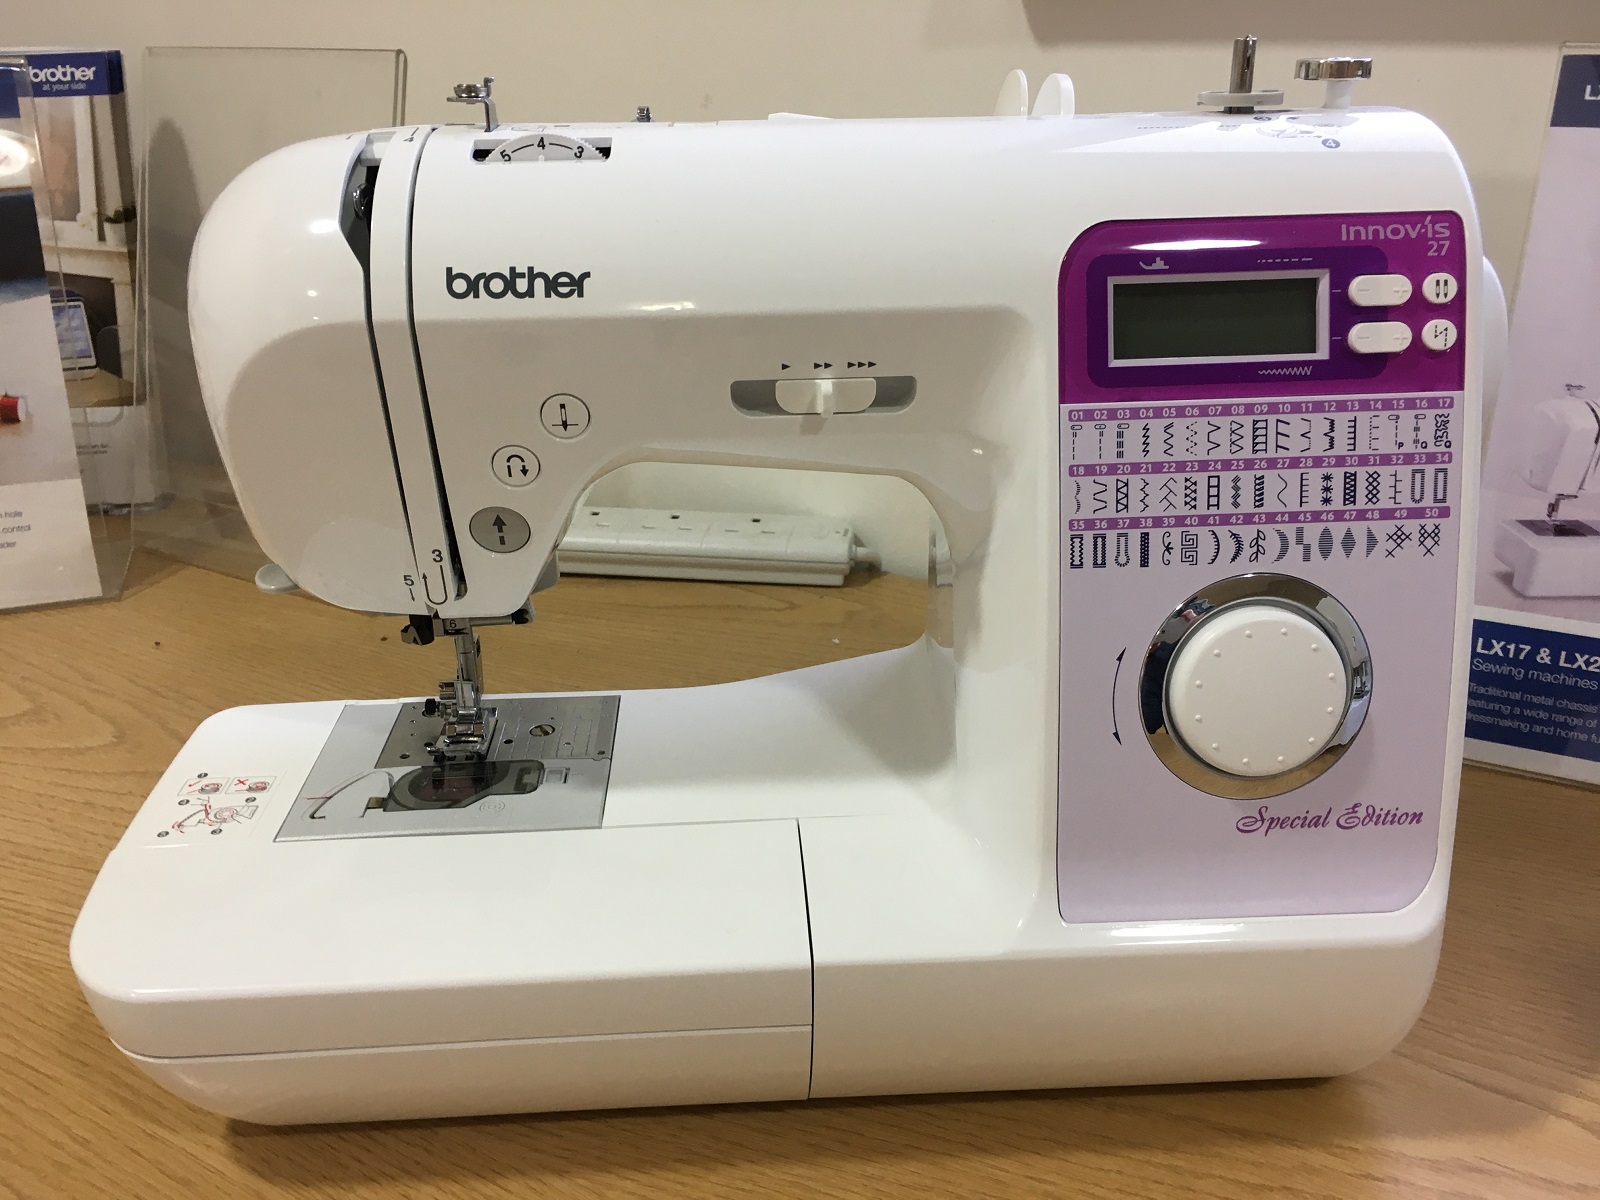 Brother Innov Is Ns2750d